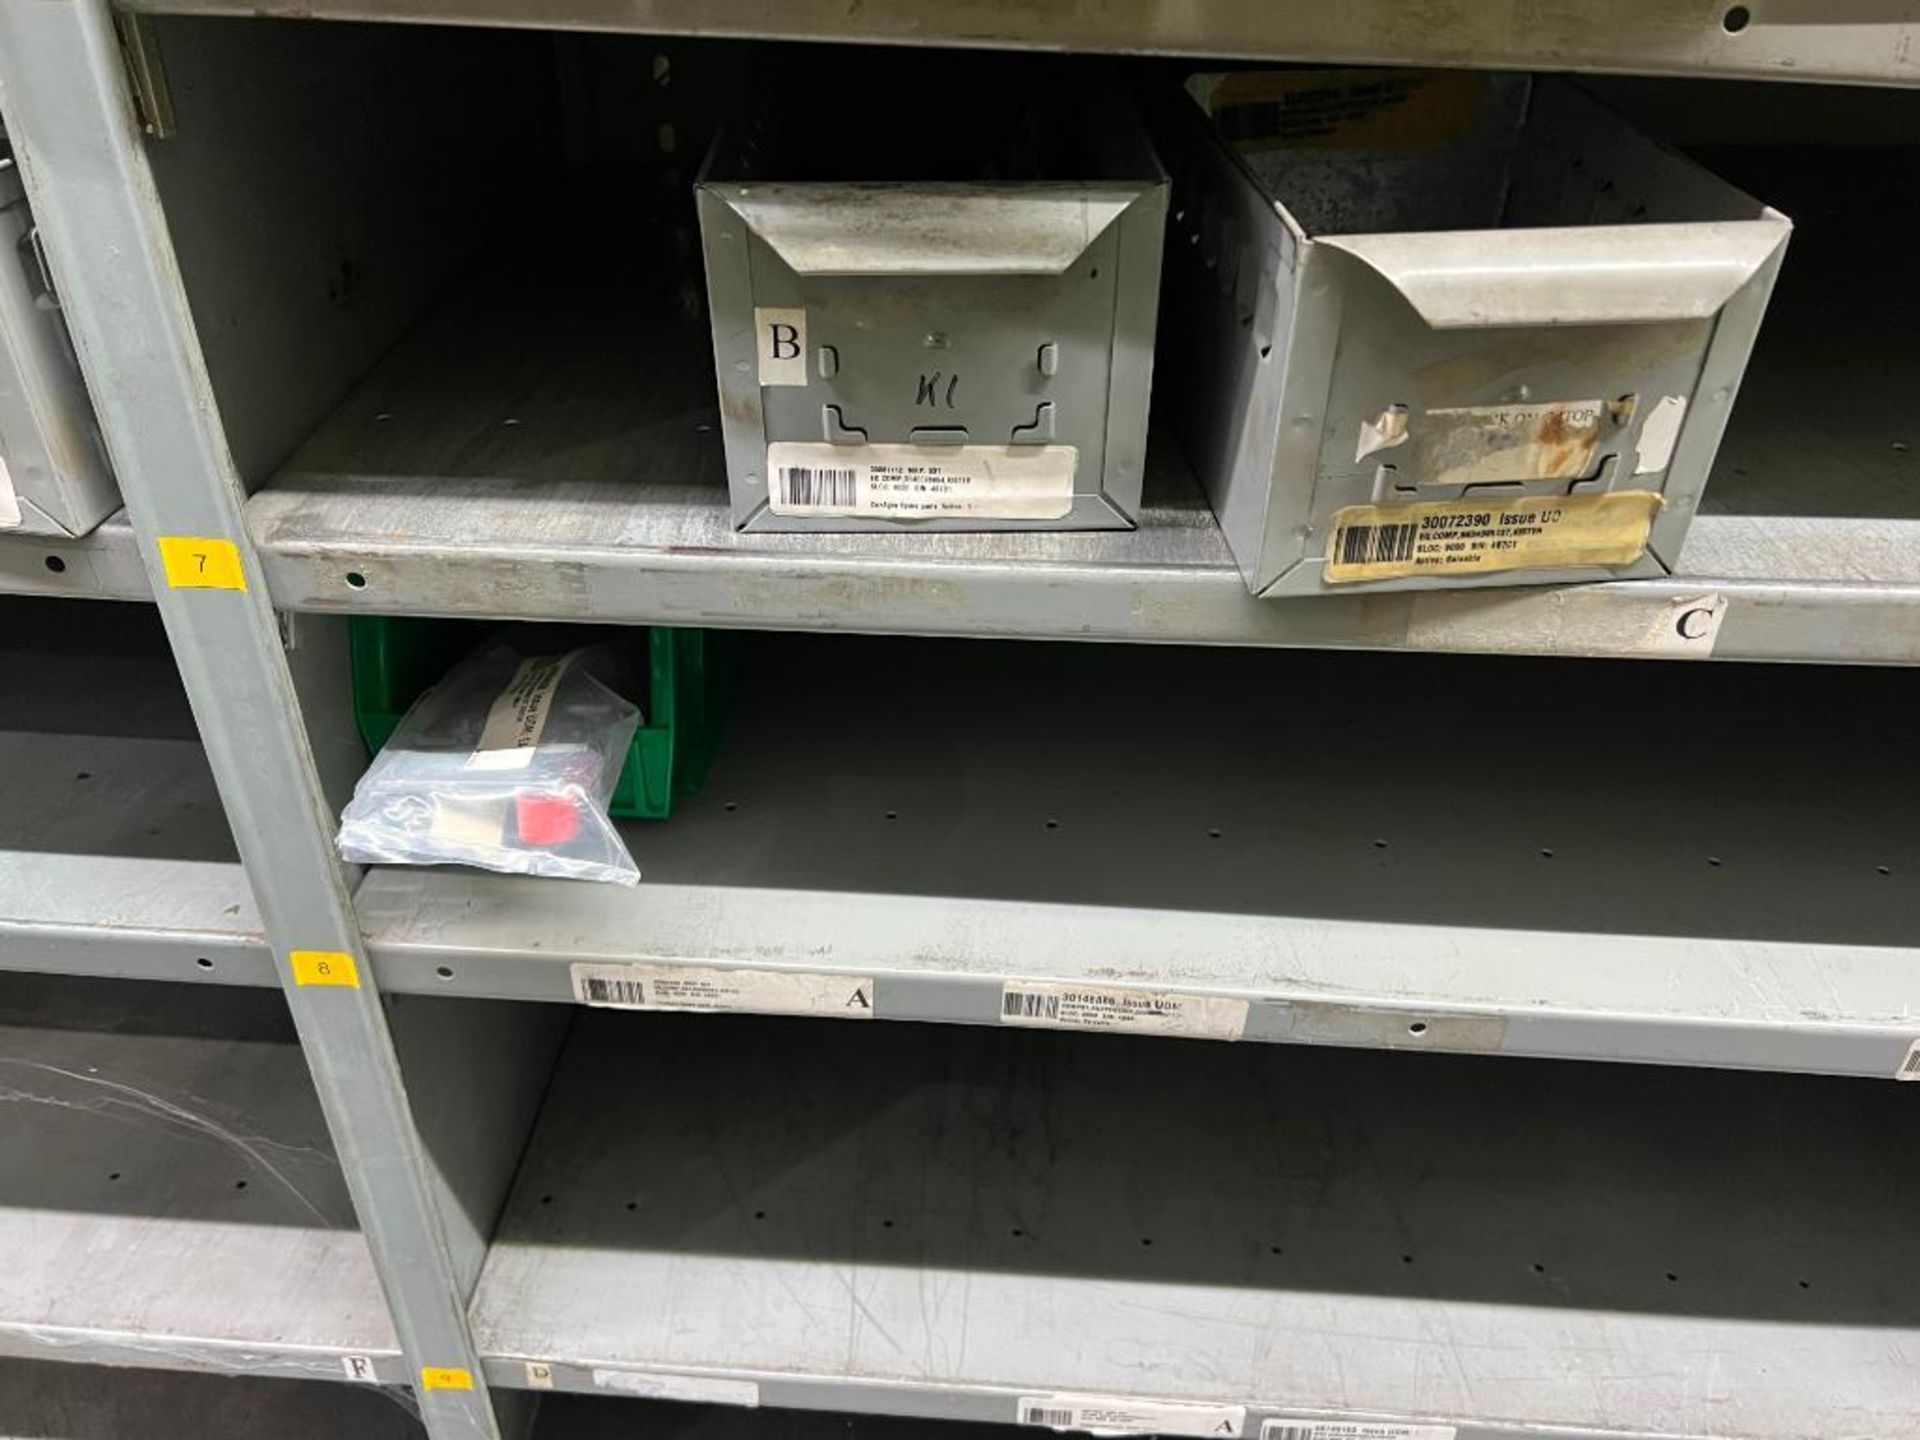 contents of gray shelving units to include, bearings, shafts, filters, fuses, pneumatic scale parts, - Image 97 of 141